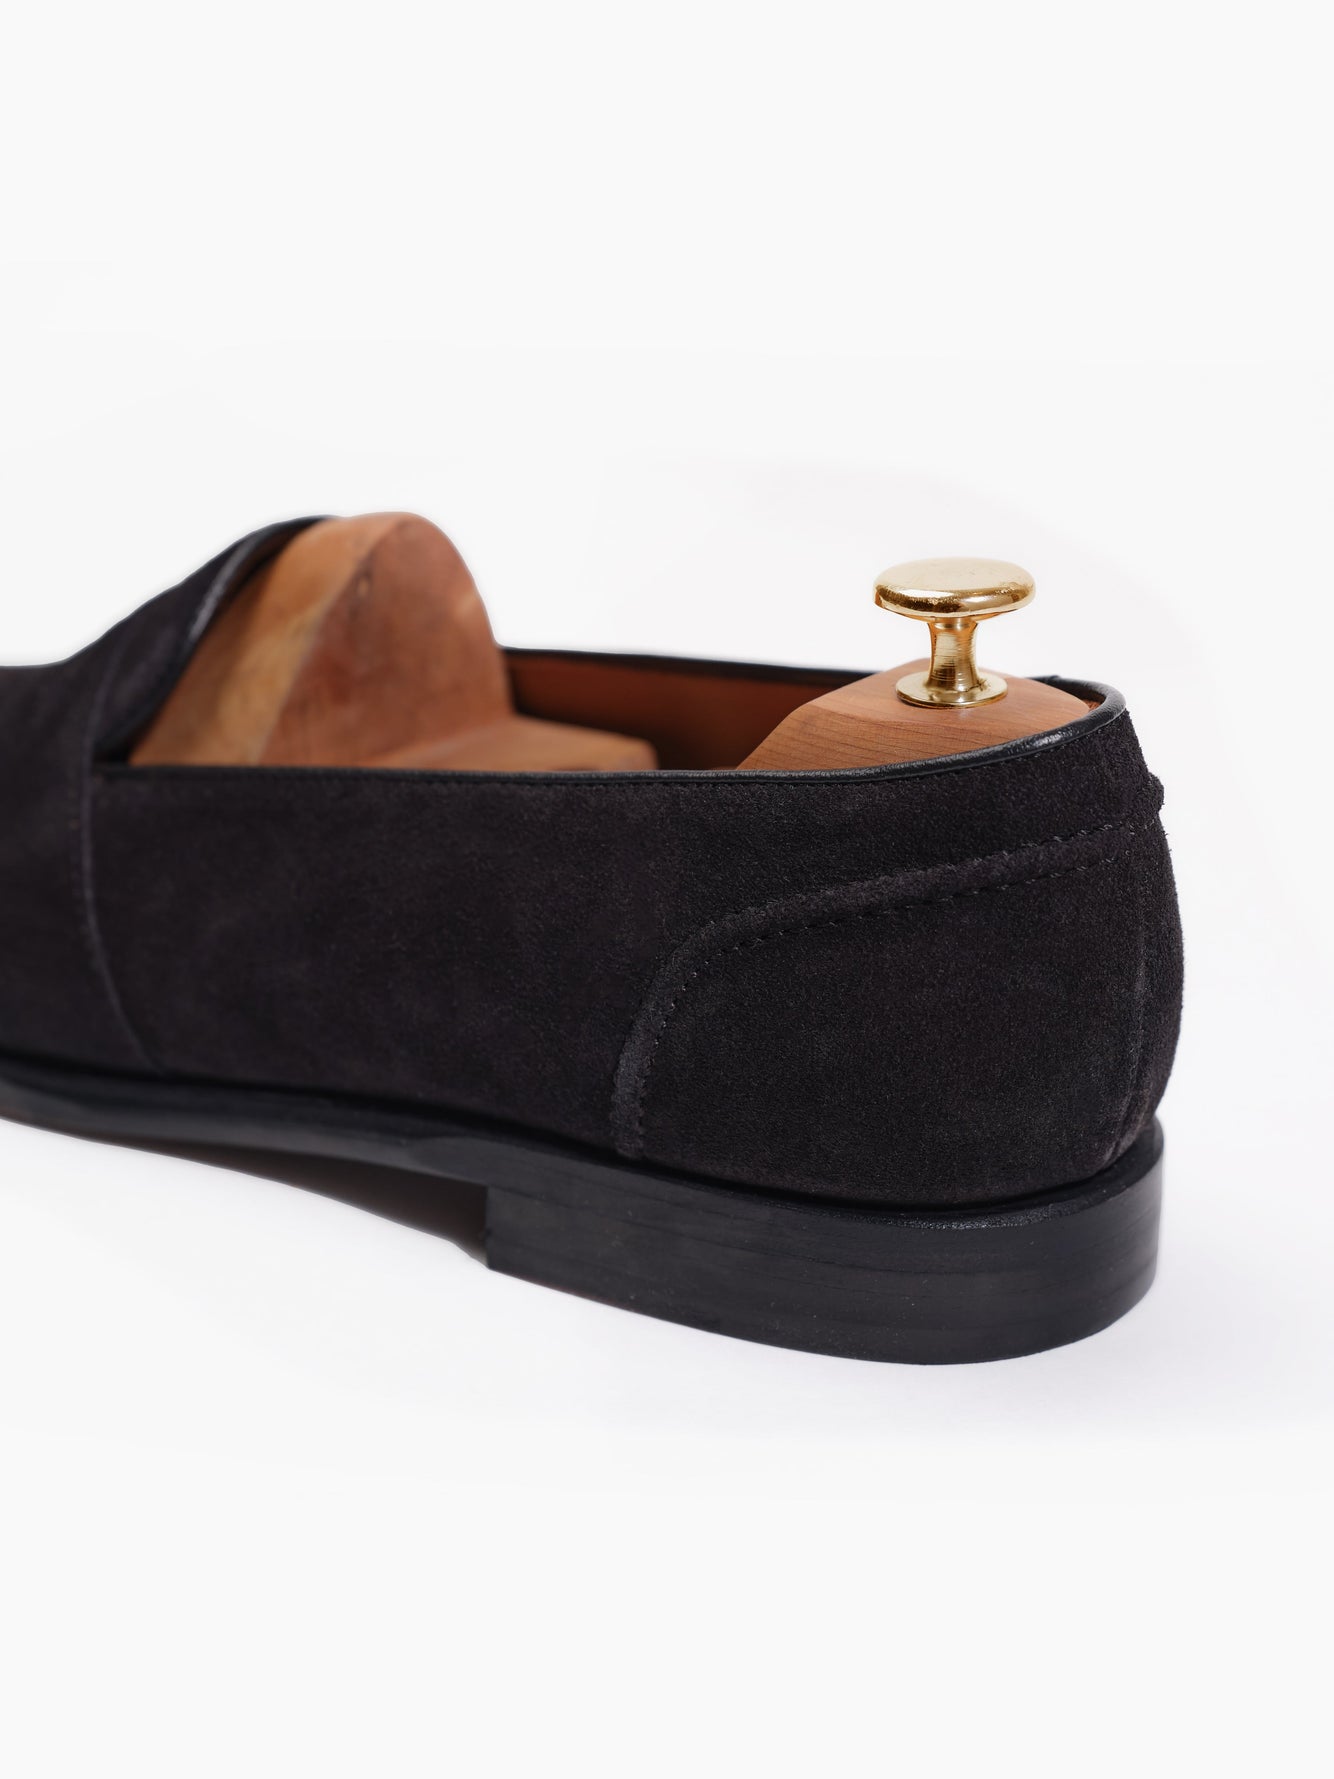 Penny Loafers Black Suede - Grand Le Mar